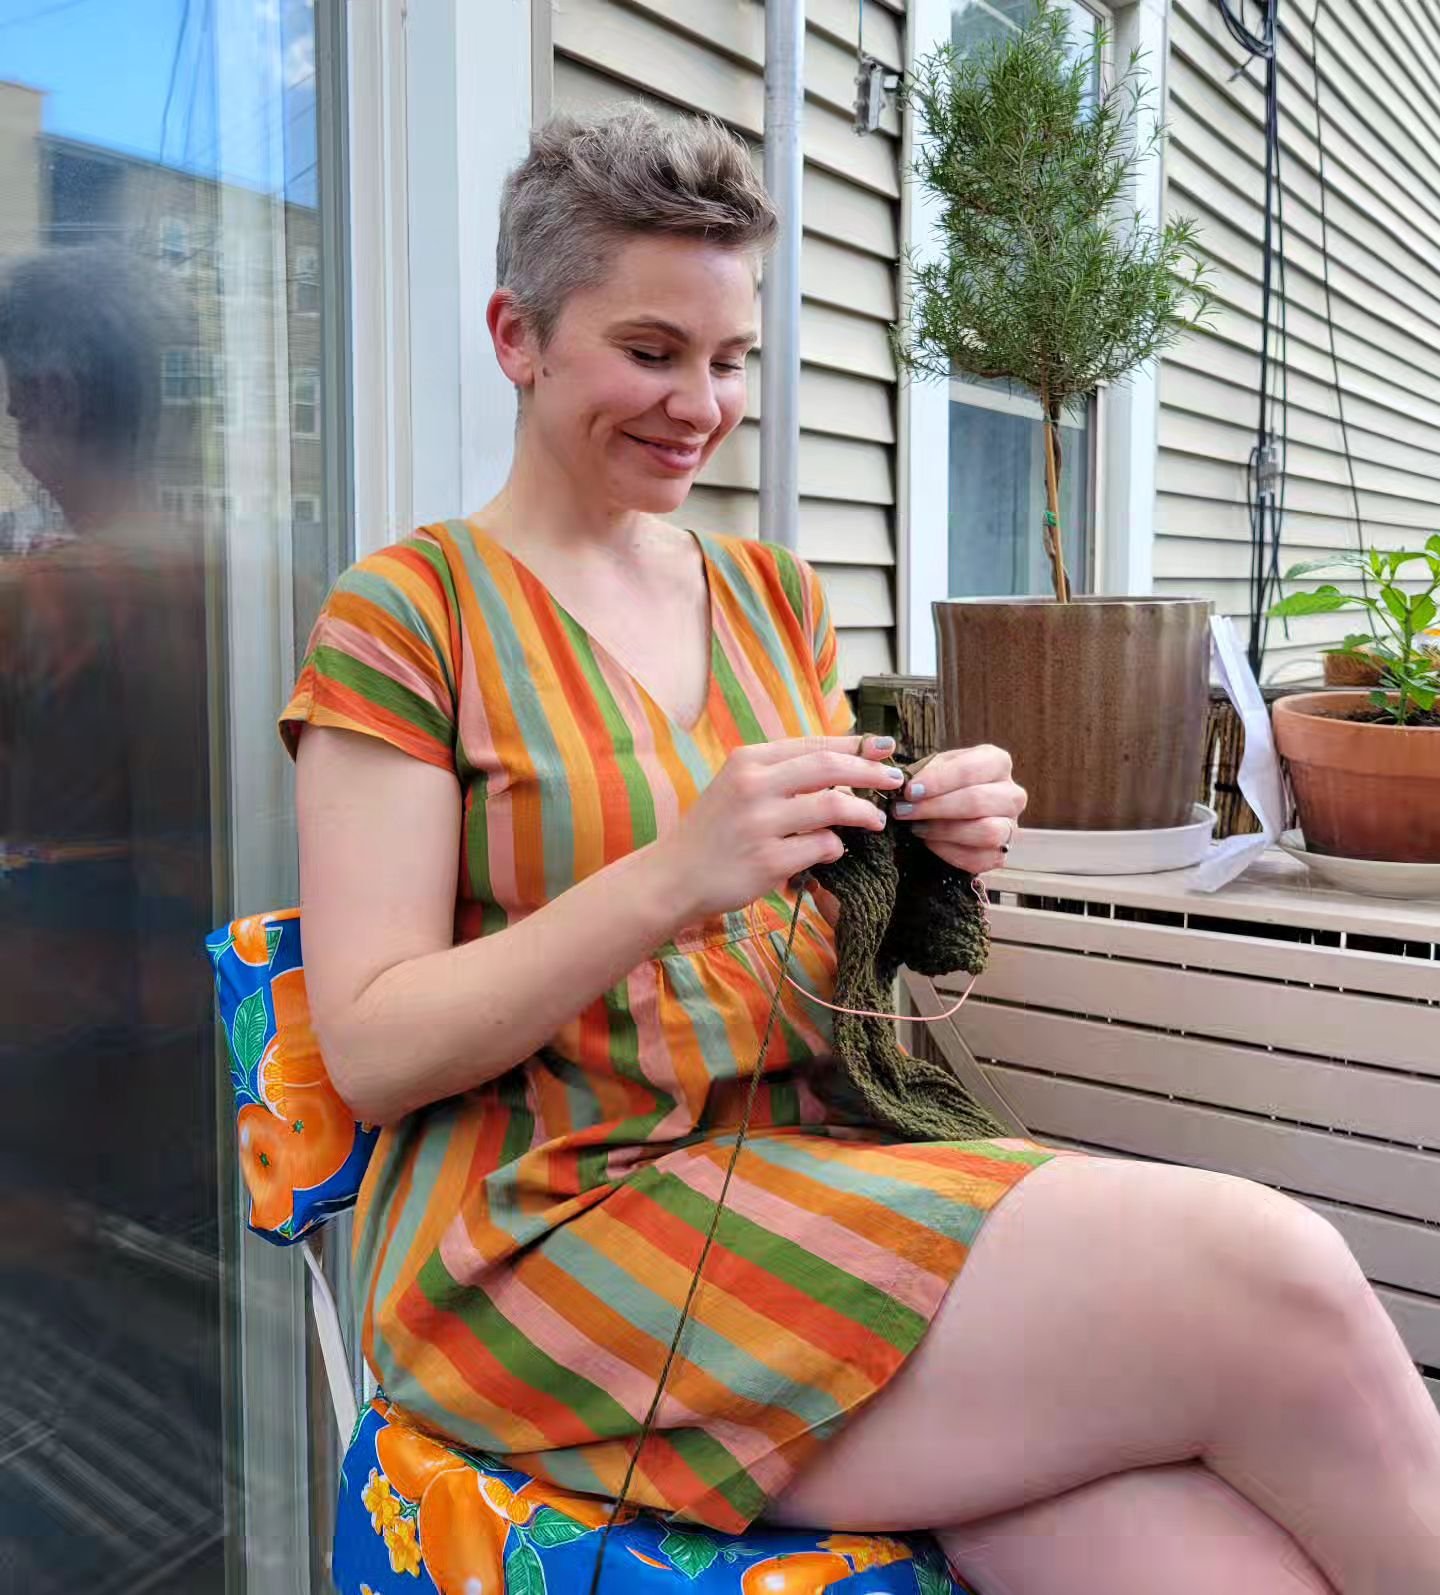 Me Made May day 18! 

Sneaking in some knitting on the porch between classes today. It's nice and warm today so I'm in my @seamwork Benning Dress and bonus points for the new chair cushions I made this week! #memademay #mmm2024 #memademay2024 #seamwo